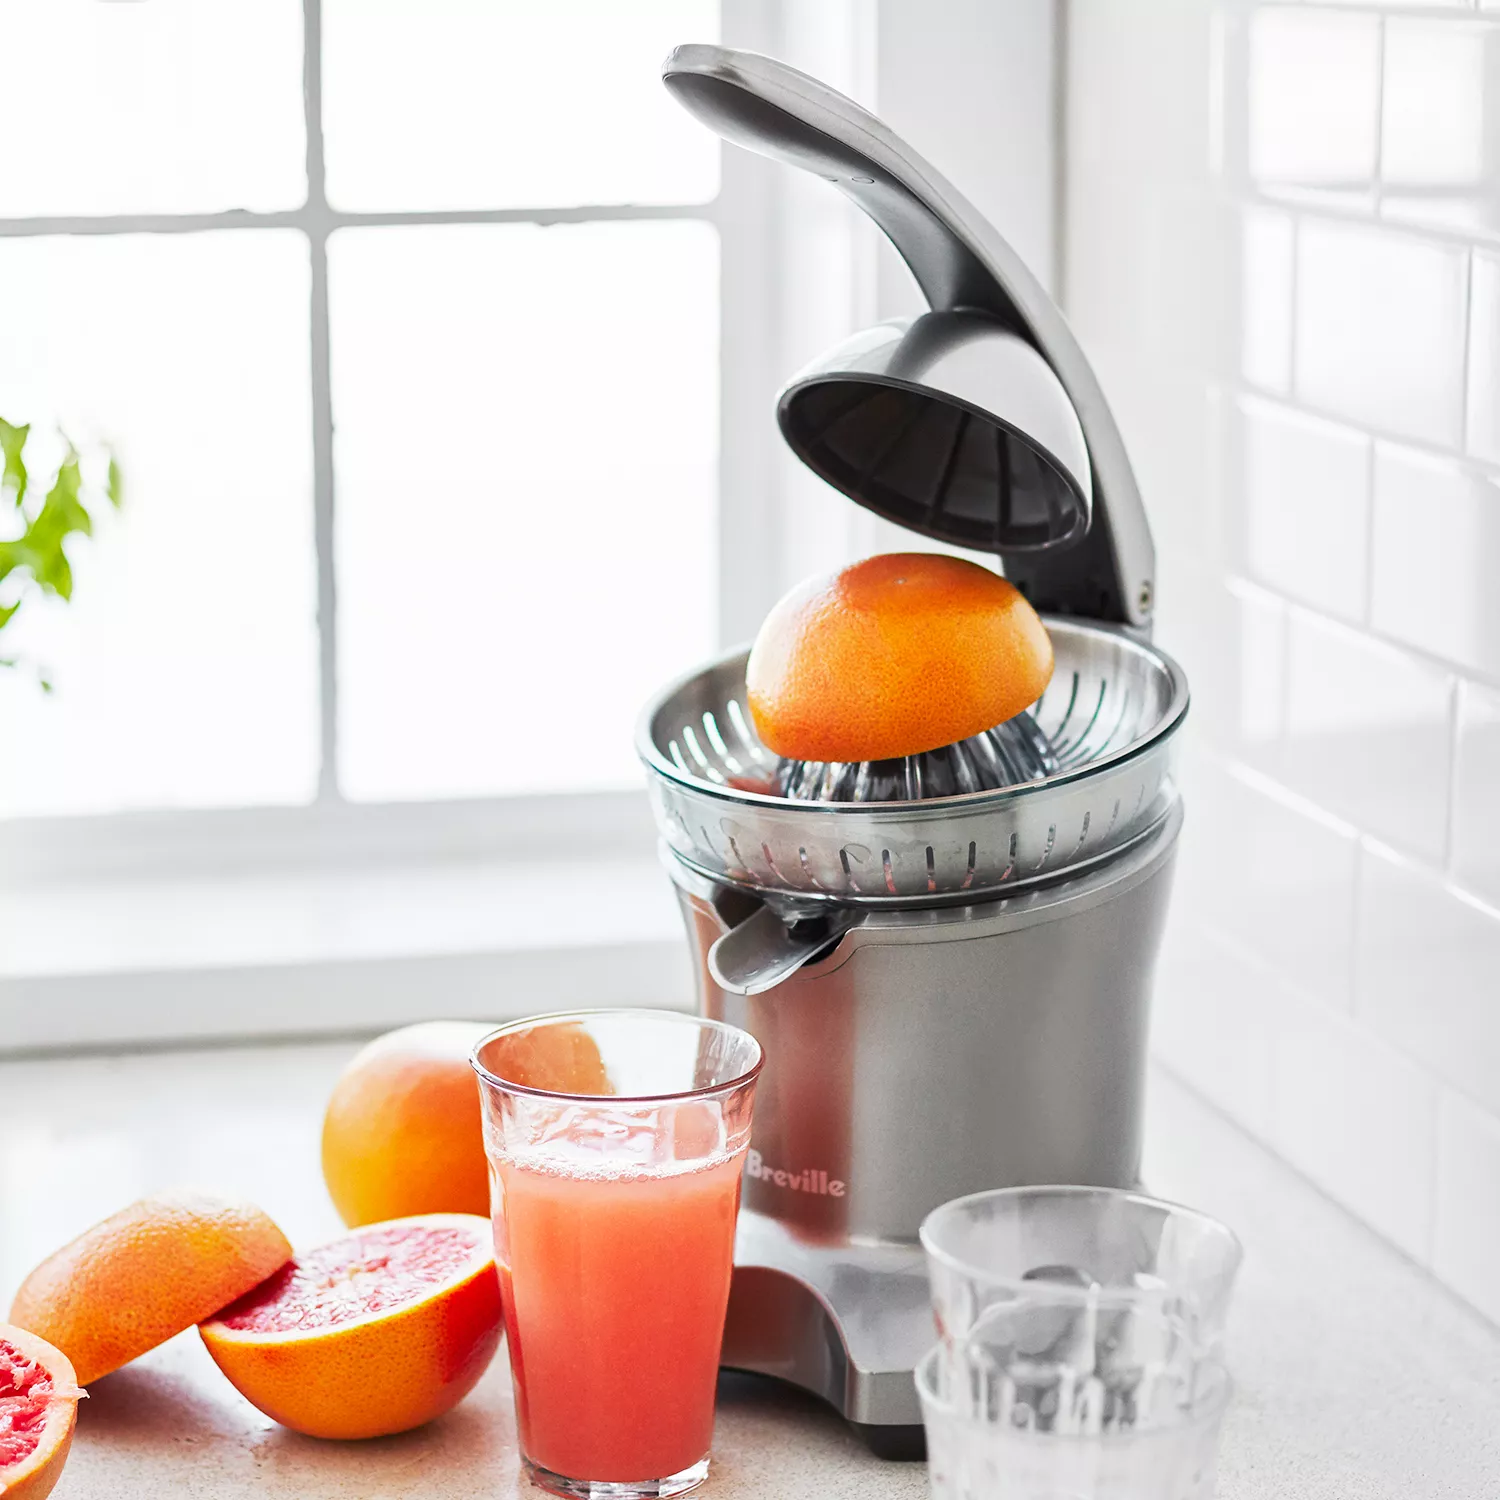 Breville Stainless Steel Electric Citrus Juicer Press + Reviews